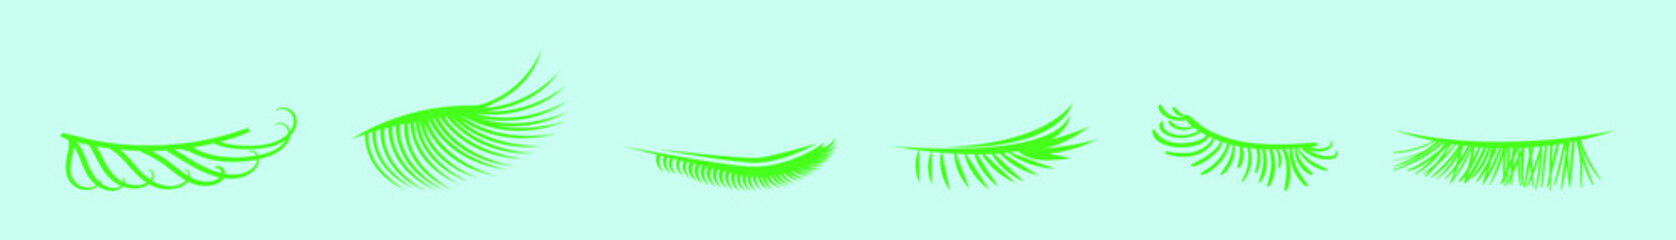 set of eyelashes cartoon icon design template with various models. vector illustration isolated on blue background